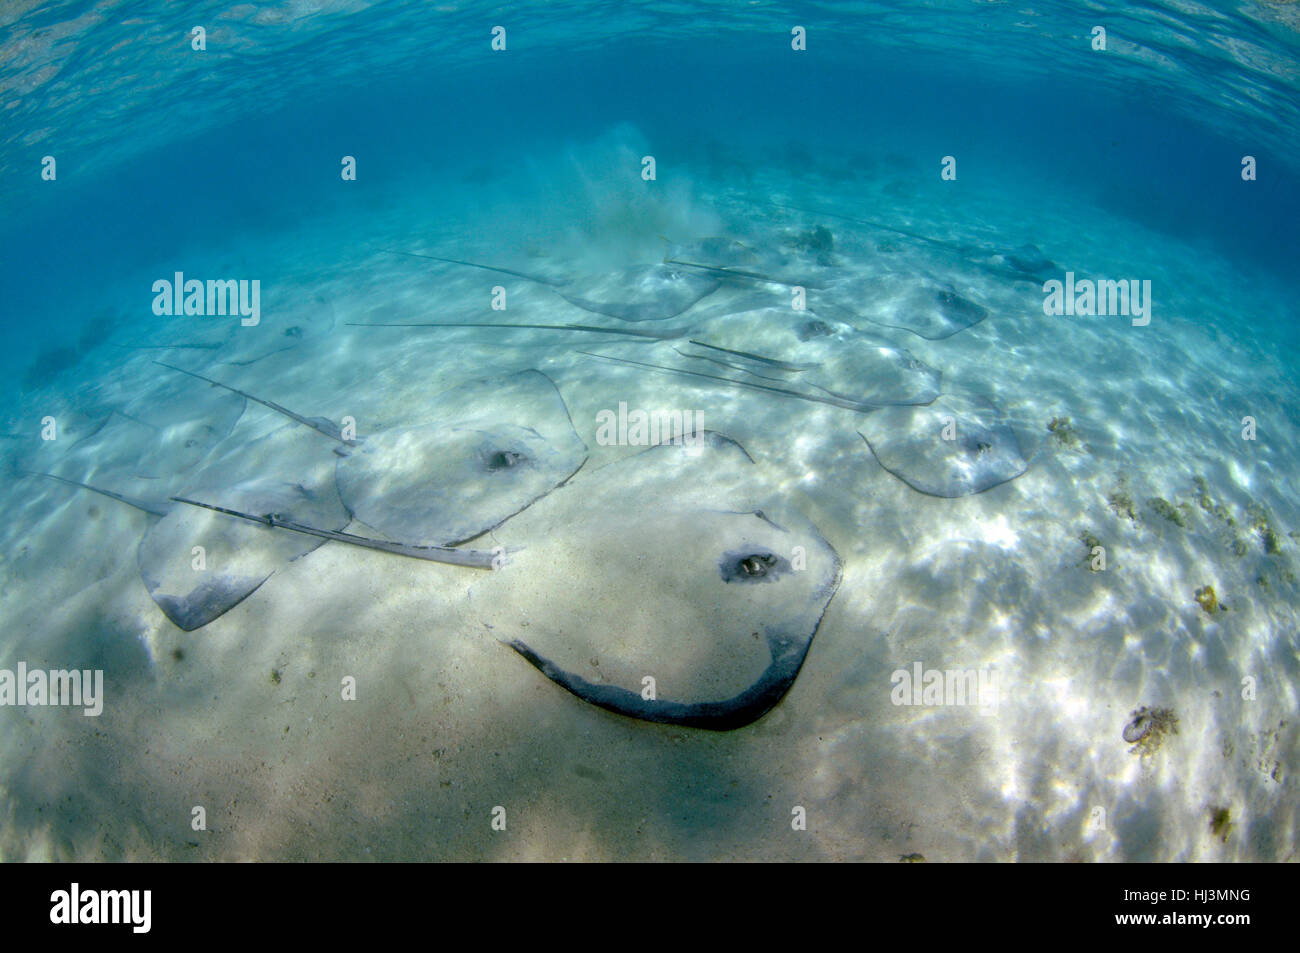 An aggregation of cowtail stingrays, Pastinachus sephen, in shallow waters off Shark Bay, Heron Island, Great Barrier Reef, Queensland, Australia Stock Photo